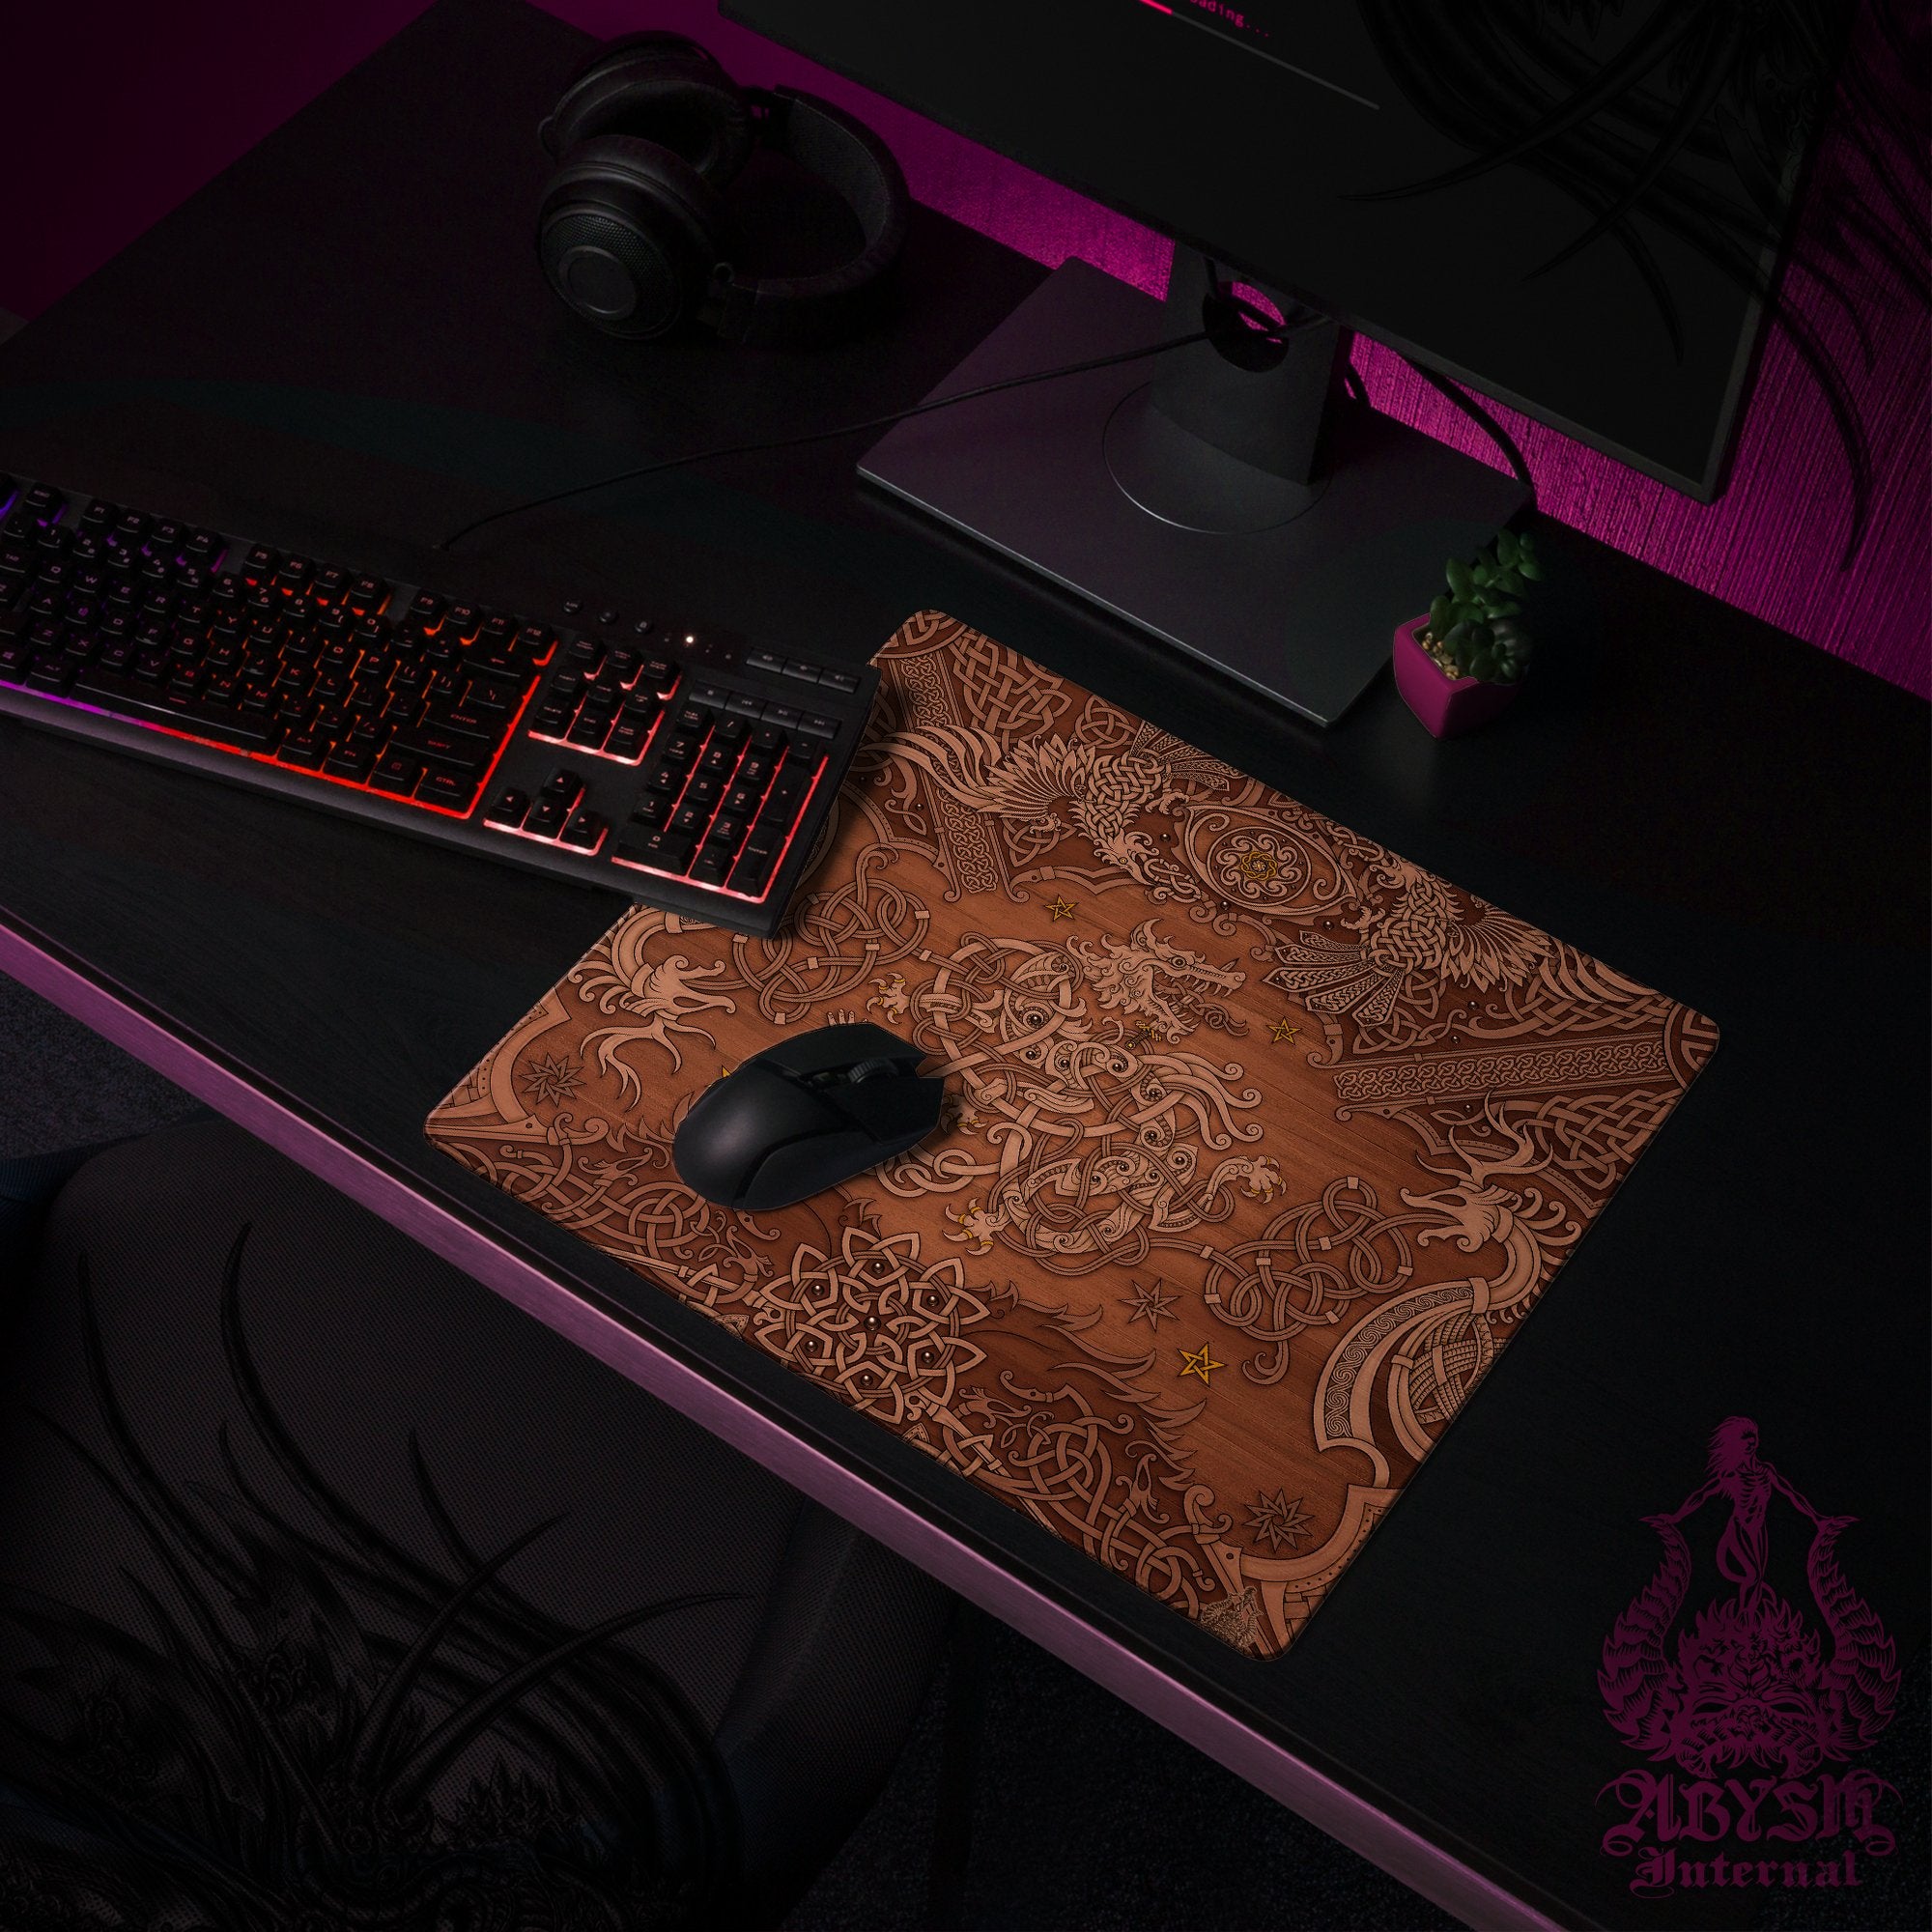 Nordic Wolf Workpad, Norse Knotwork Desk Mat, Fenrir Gaming Mouse Pad, Viking Table Protector Cover, Art Print - Wood - Abysm Internal